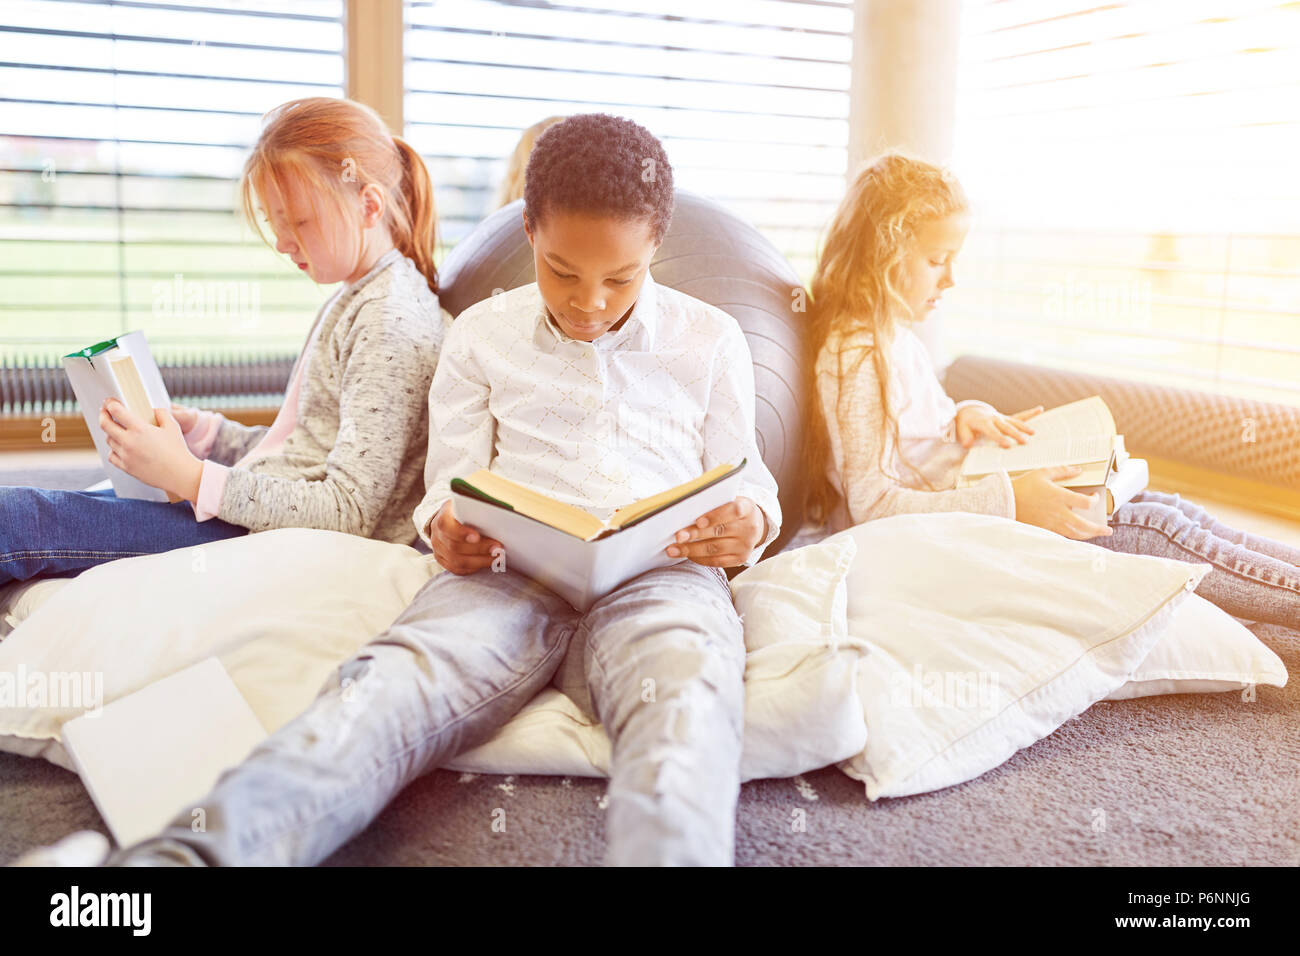 Group of children together read books in the reading corner of a library Stock Photo